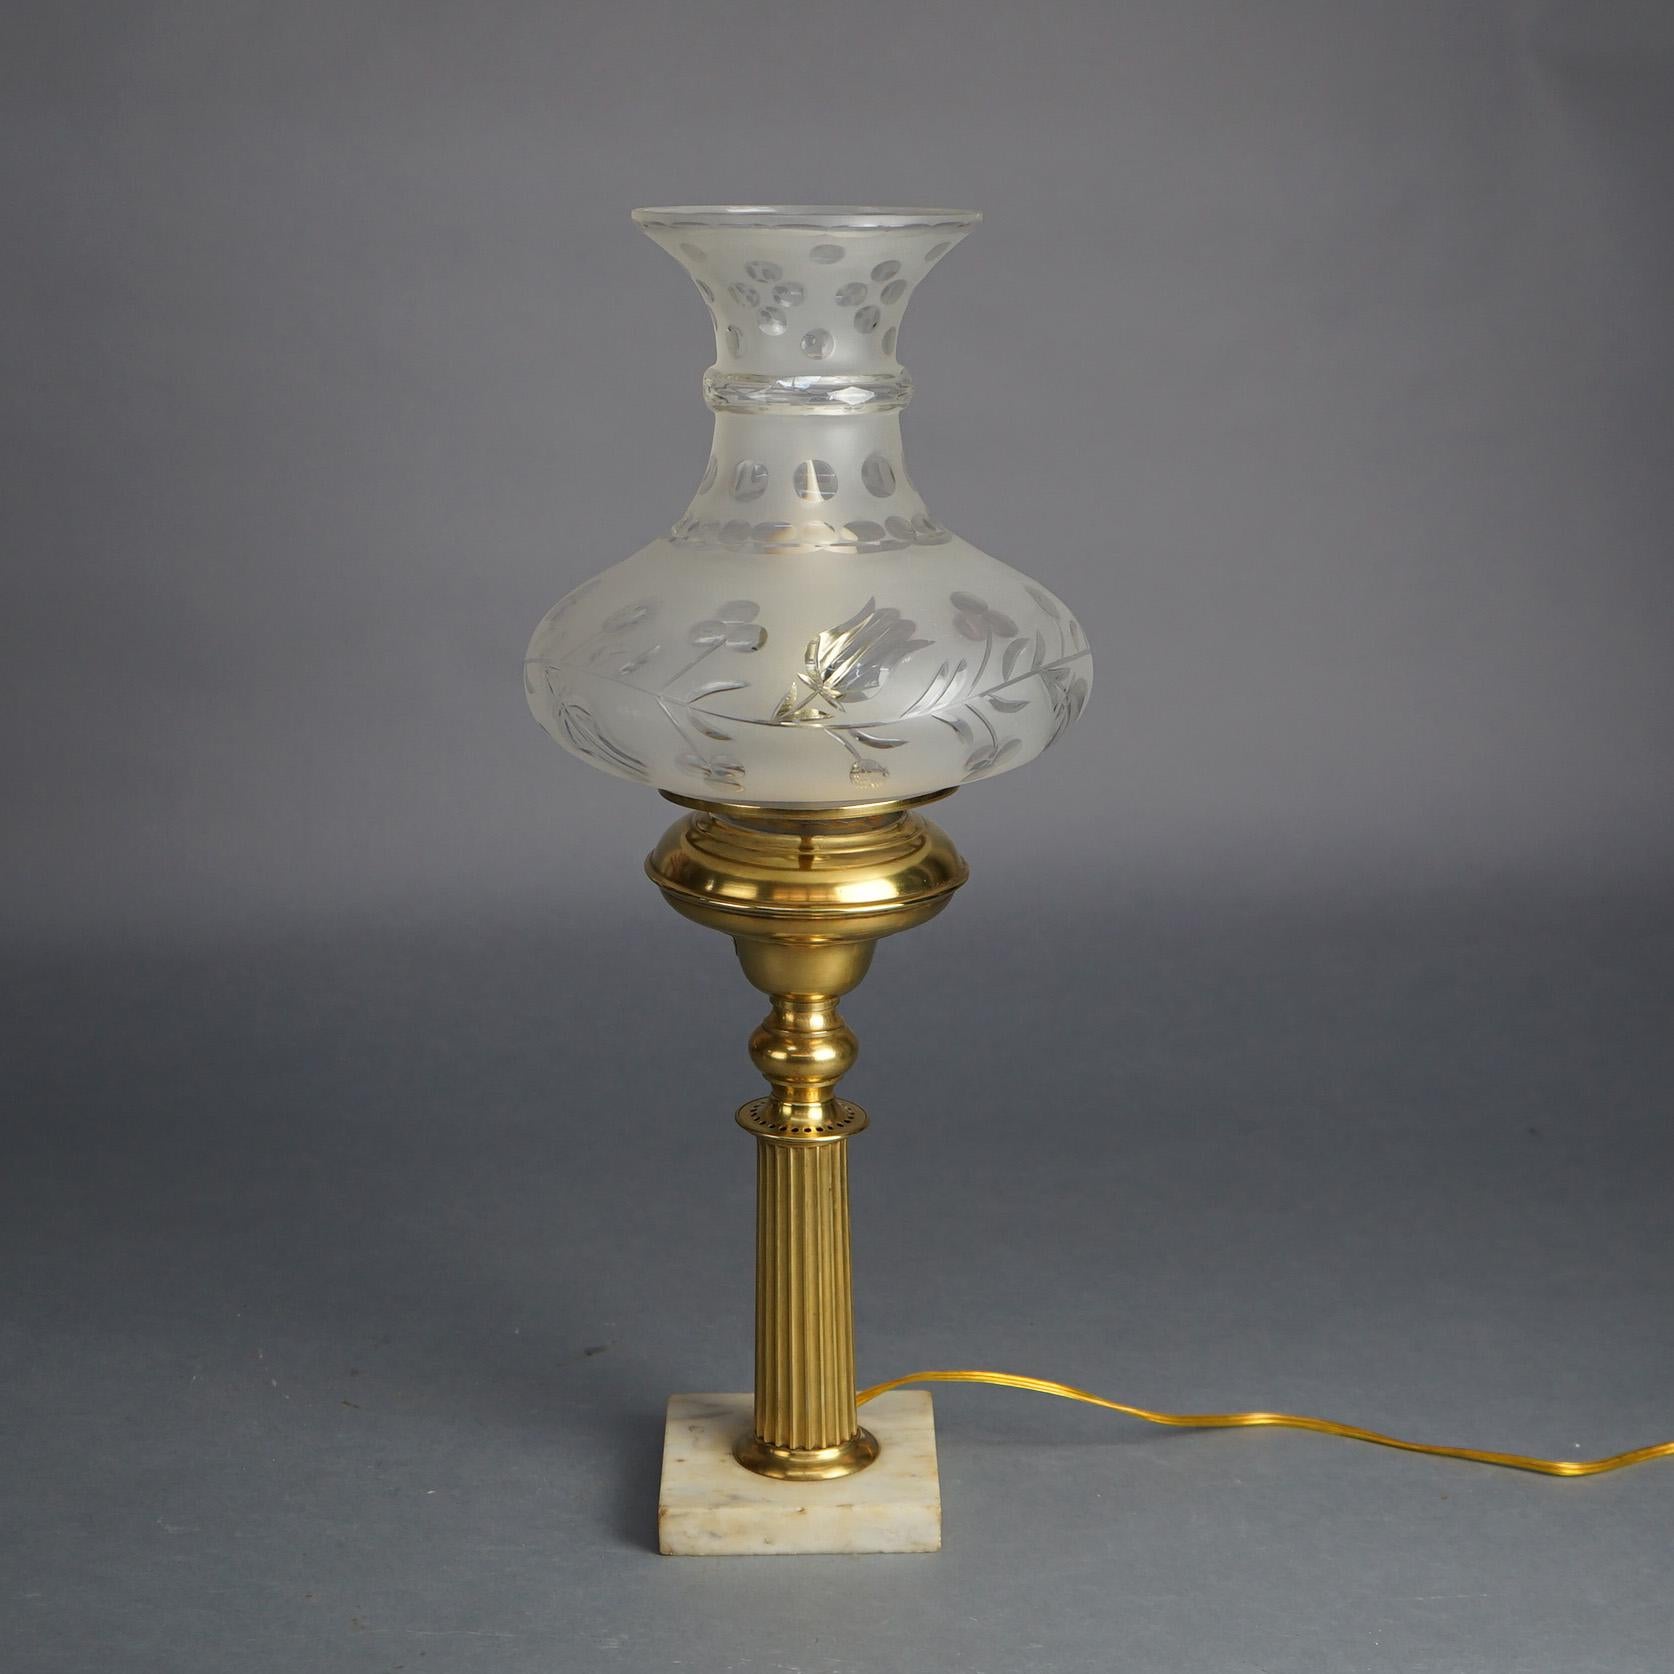 19th Century Antique Brass Solar Lamp with Tam-O-Shanter Cut Glass Shade & Marble Base C1840 For Sale